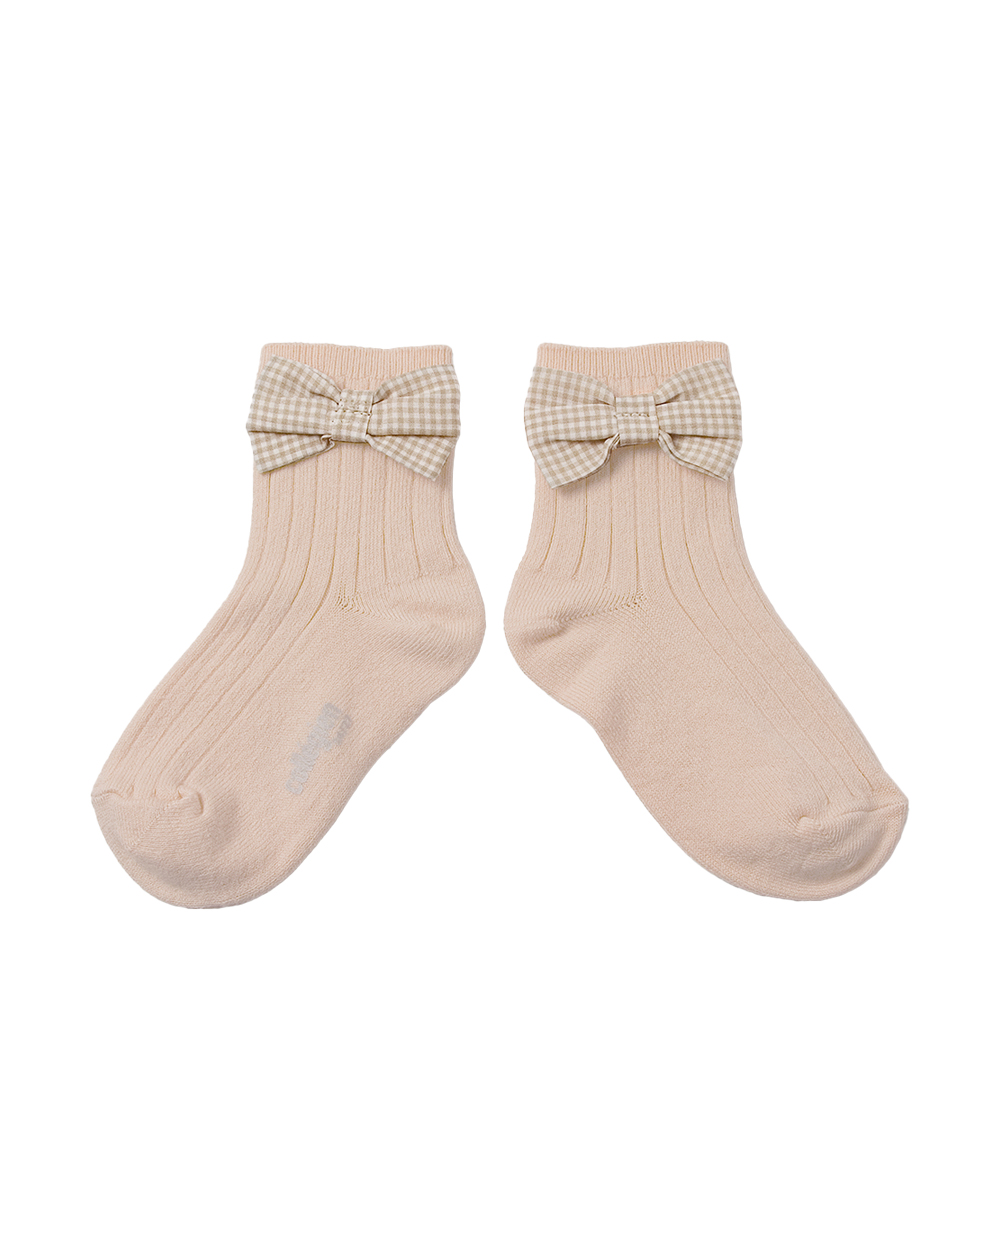 [Collégien] Colette - Ribbed Ankle Socks with Gingham bow